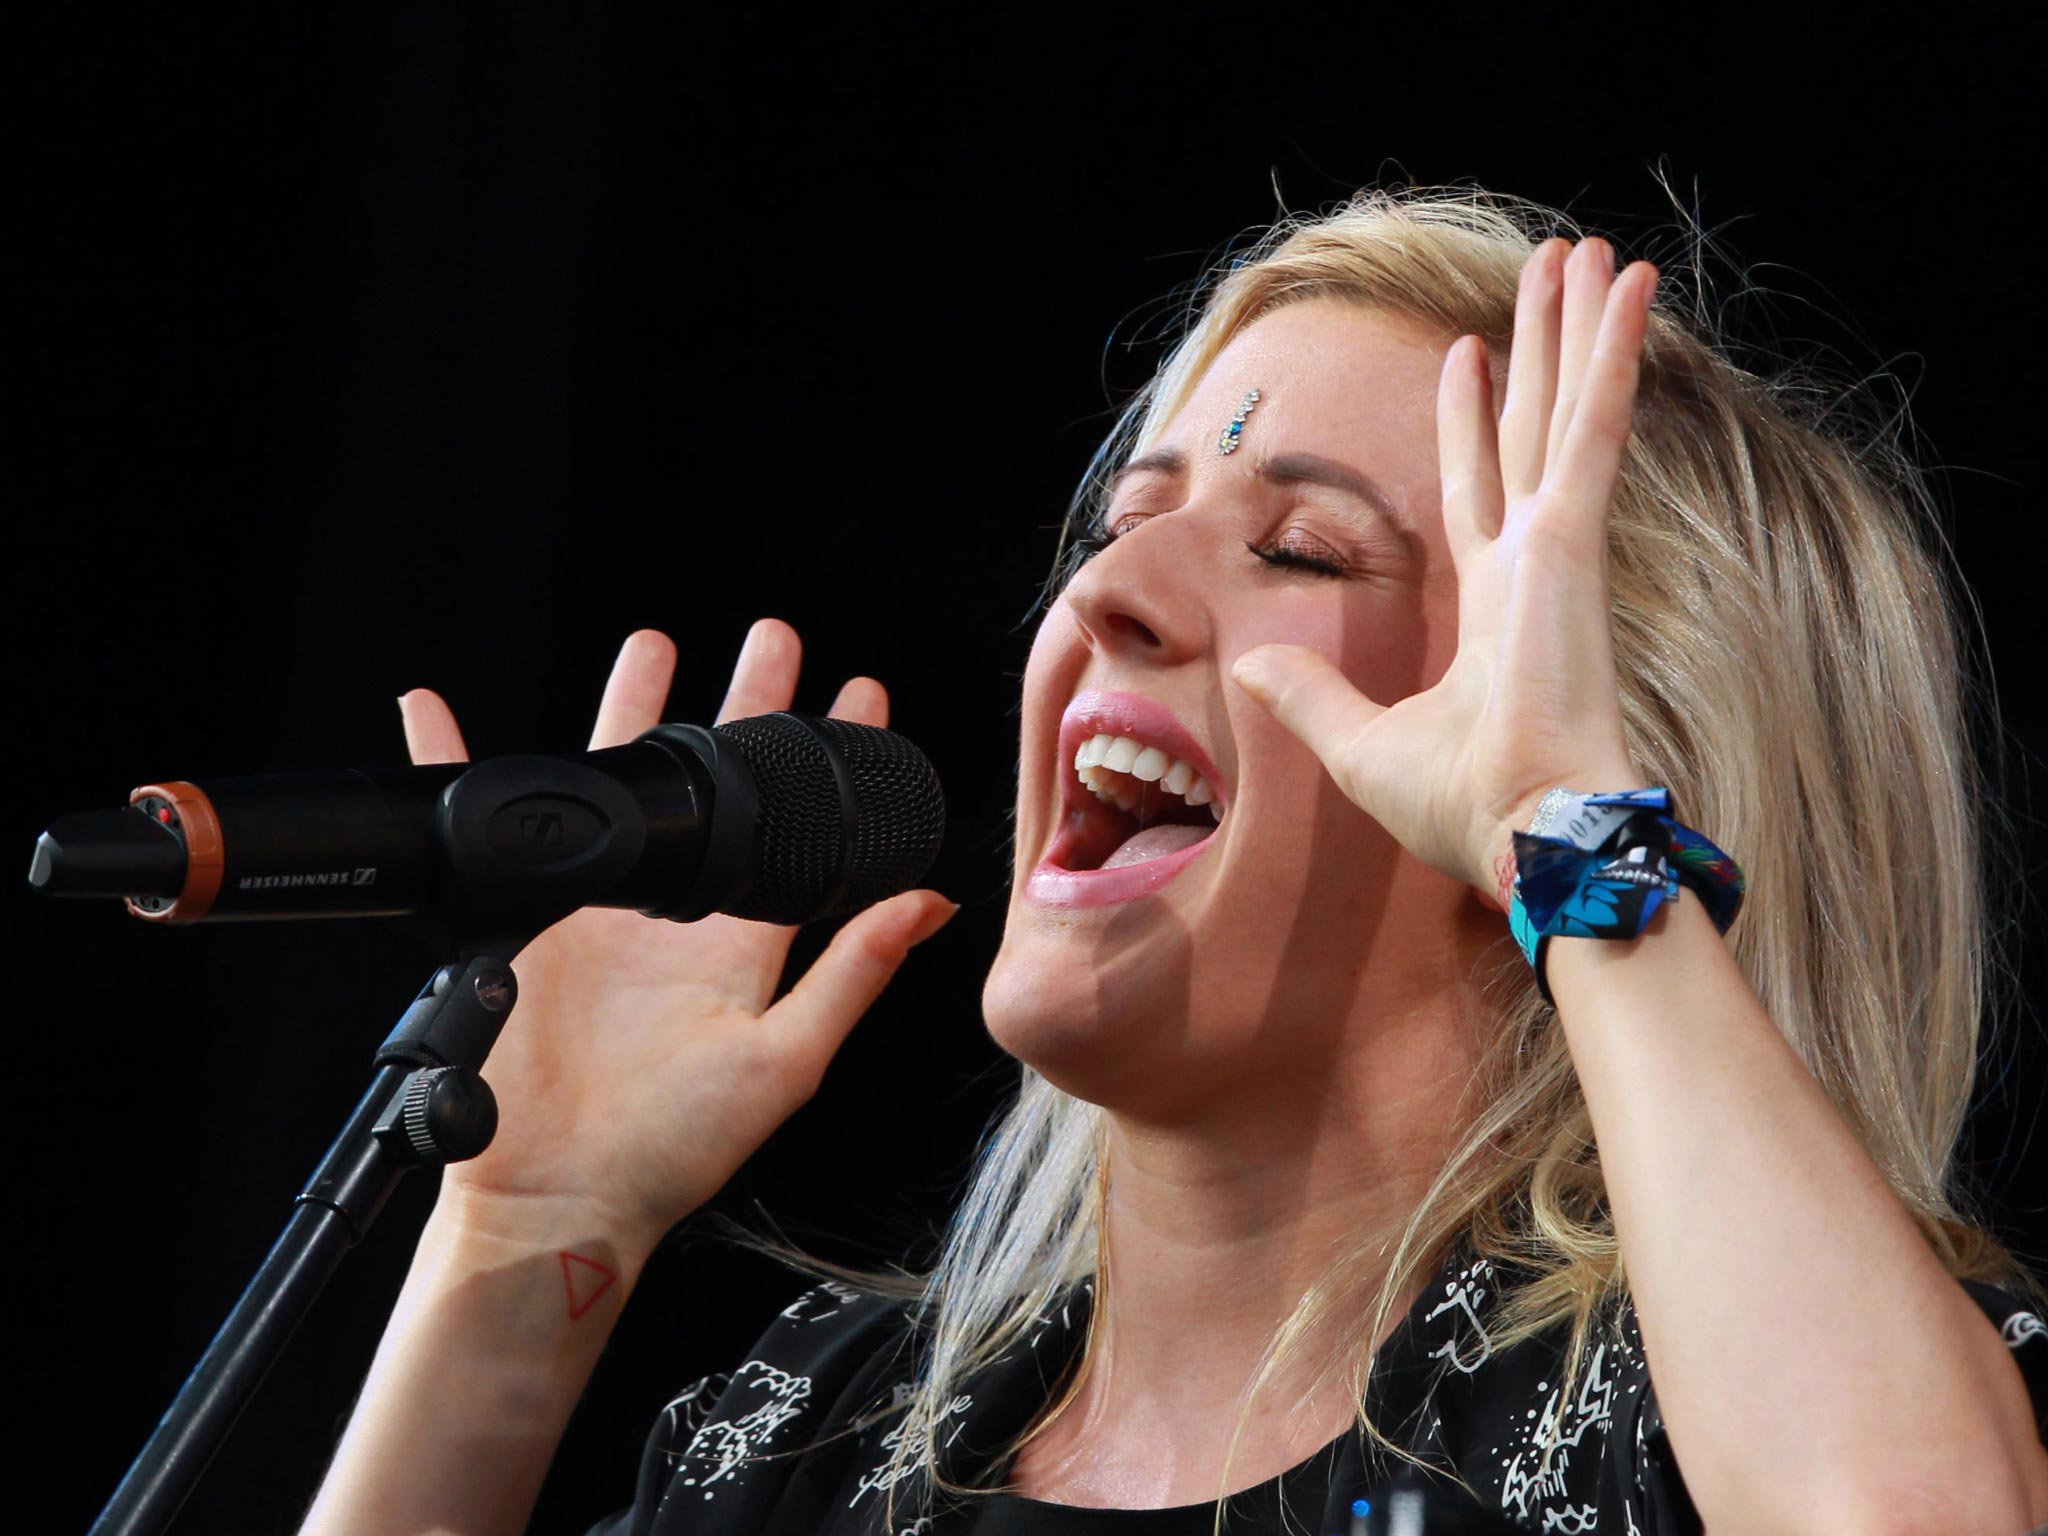 Ellie Goulding, a world-famous pop-star Nick Clegg had never heard of